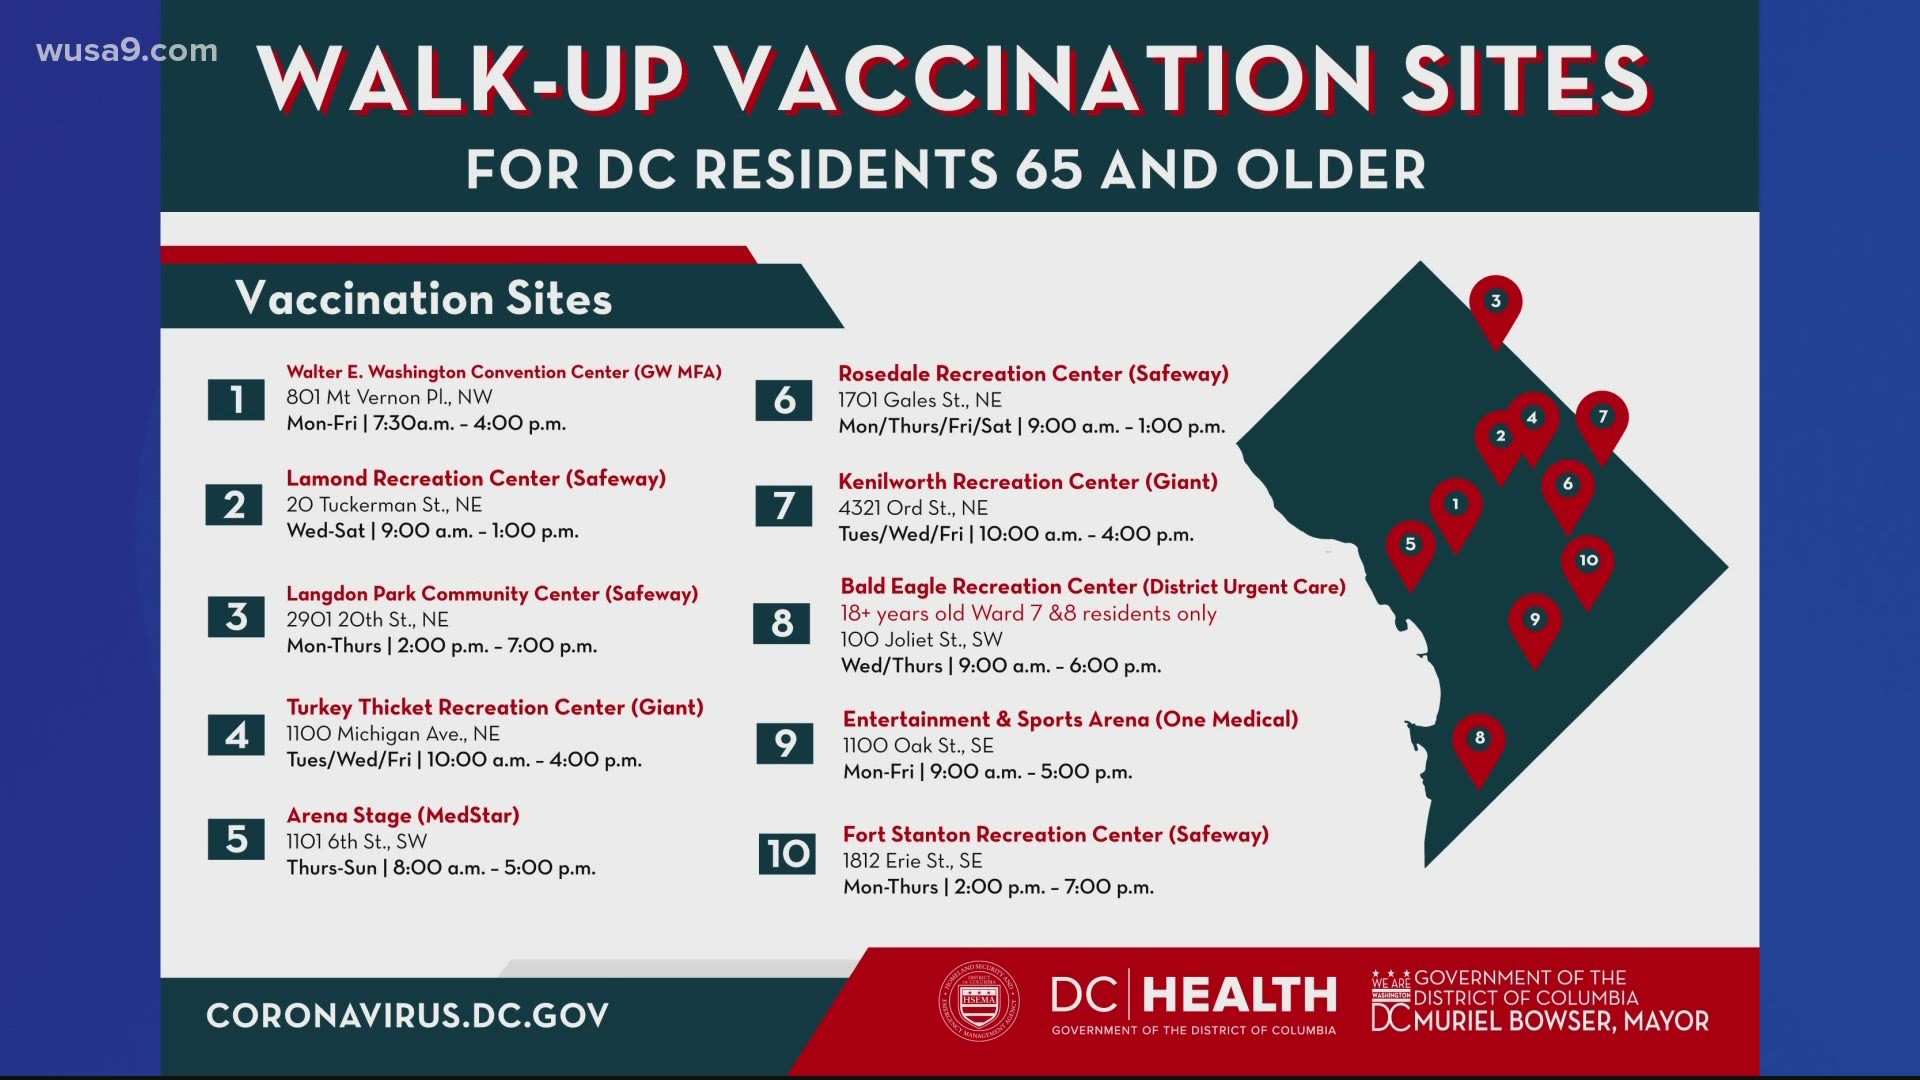 DC will be moving to walk-up vaccination sites only. Meaning anyone can walk-up and get vaccinated without an appointment